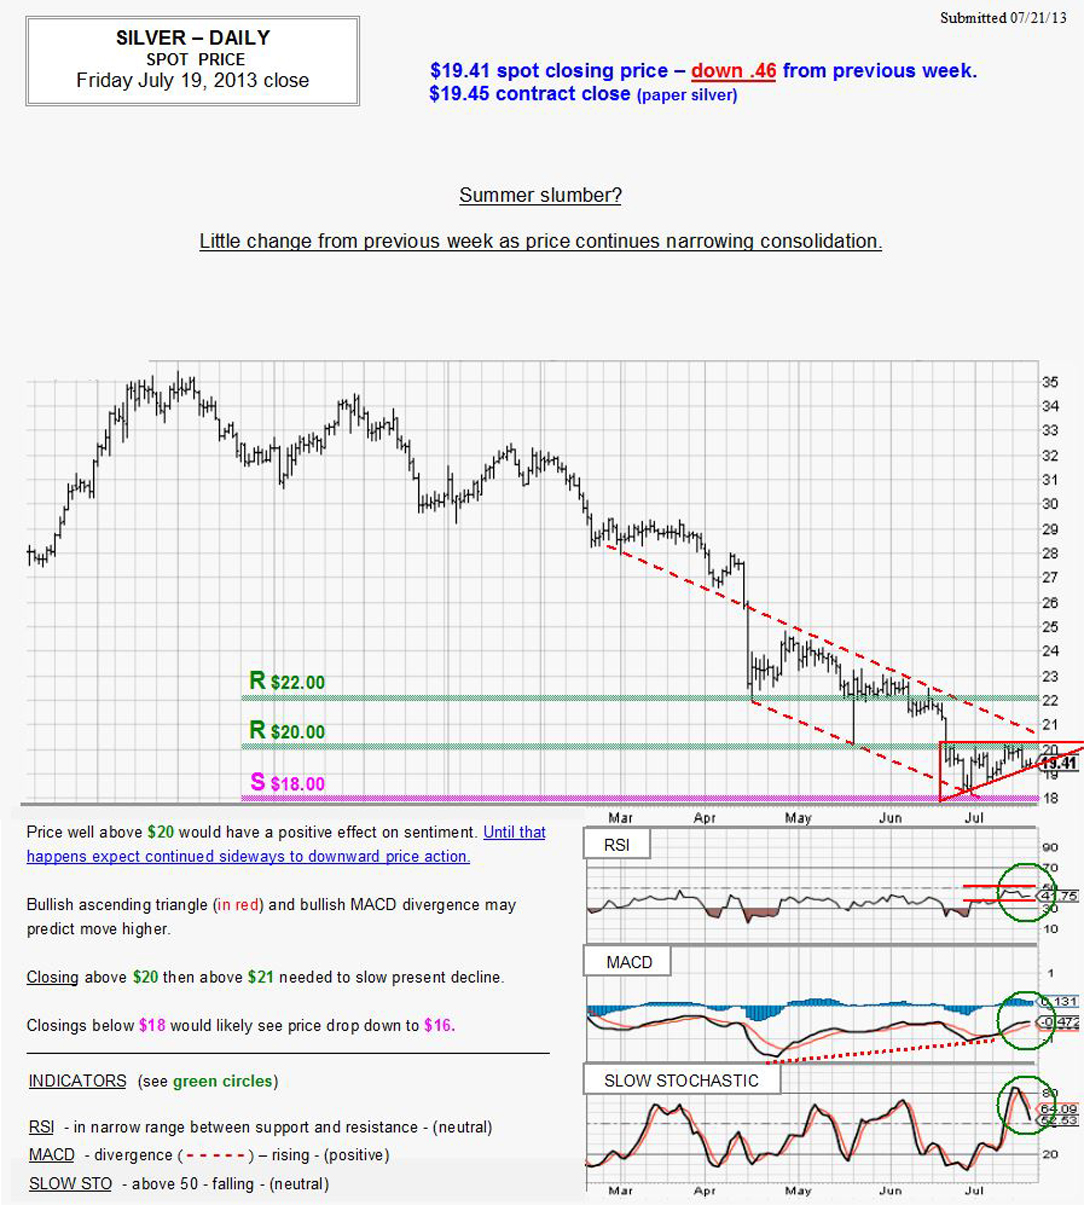 July 19, 2013 chart & commentary